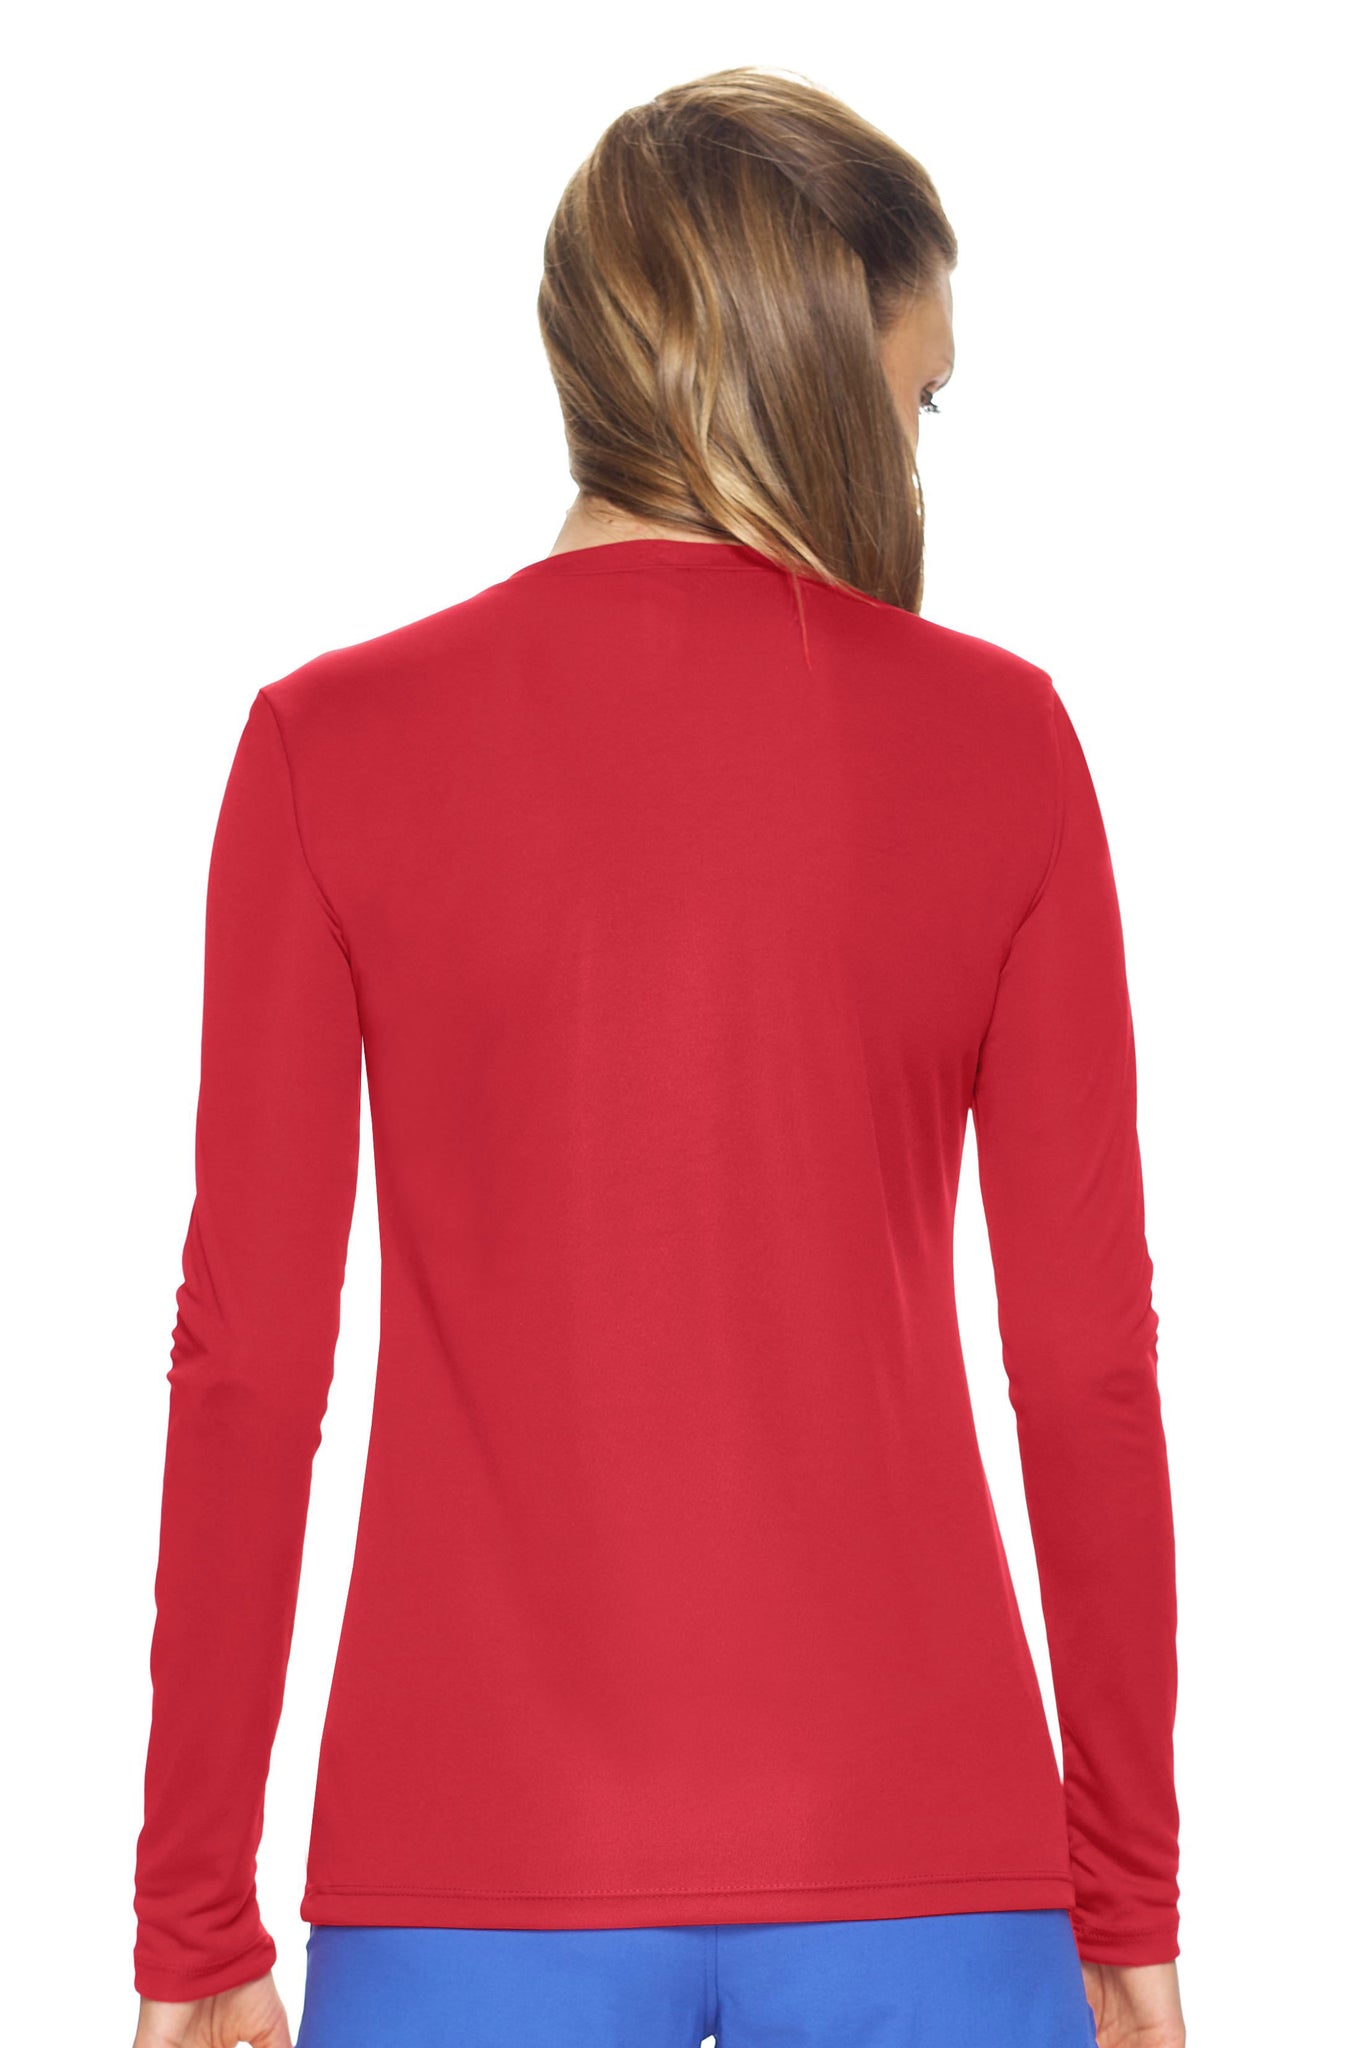 Expert Brand Wholesale Best Blanks Made in USA Activewear Performance pk MaX™ V-Neck Long Sleeve Expert Tee True Red 3#red